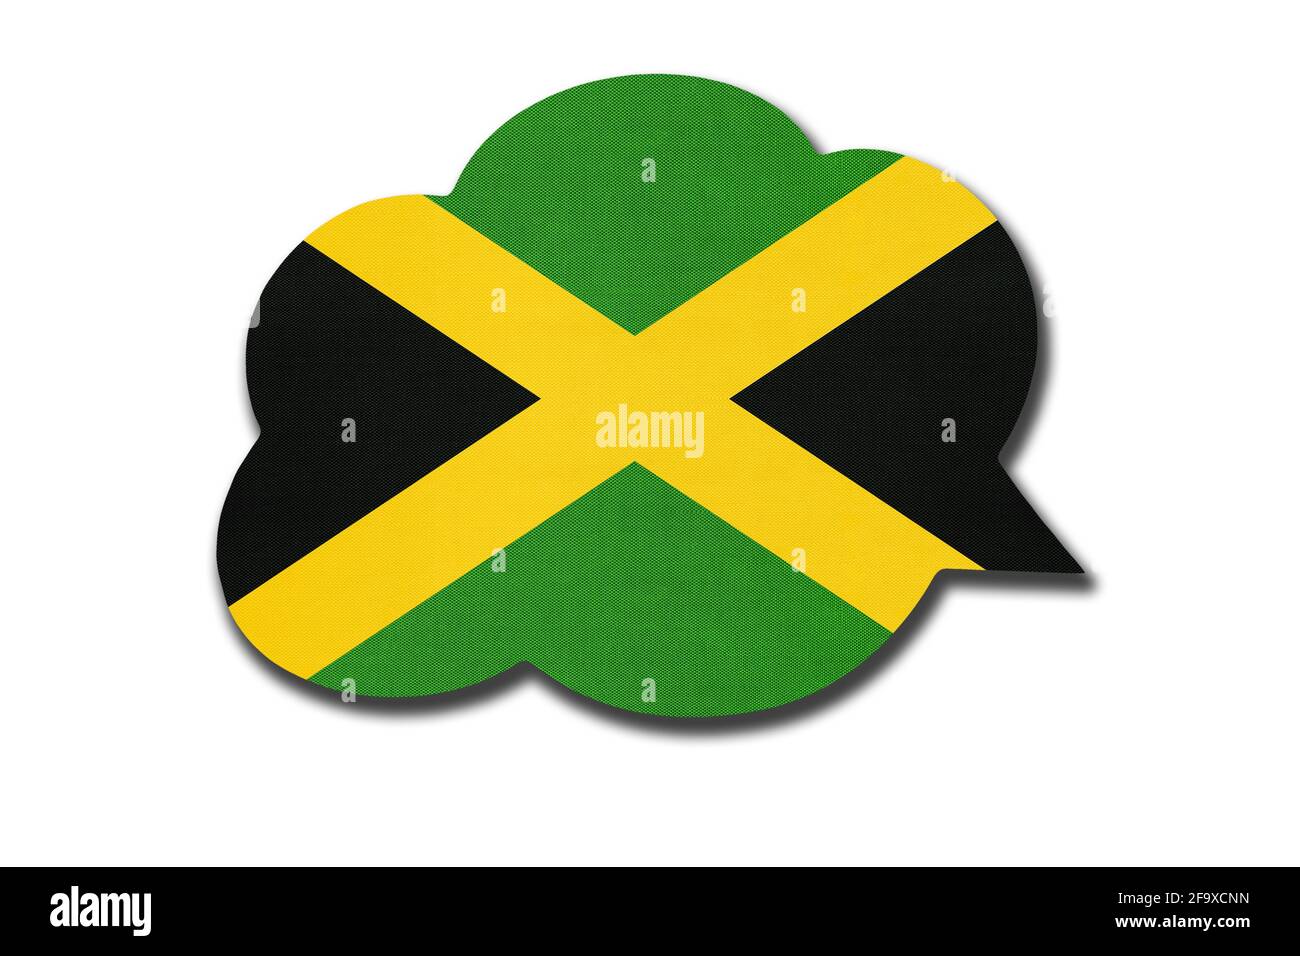 3d speech bubble with jamaican national flag isolated on white background. Symbol of Jamaica country. World communication sign. Stock Photo